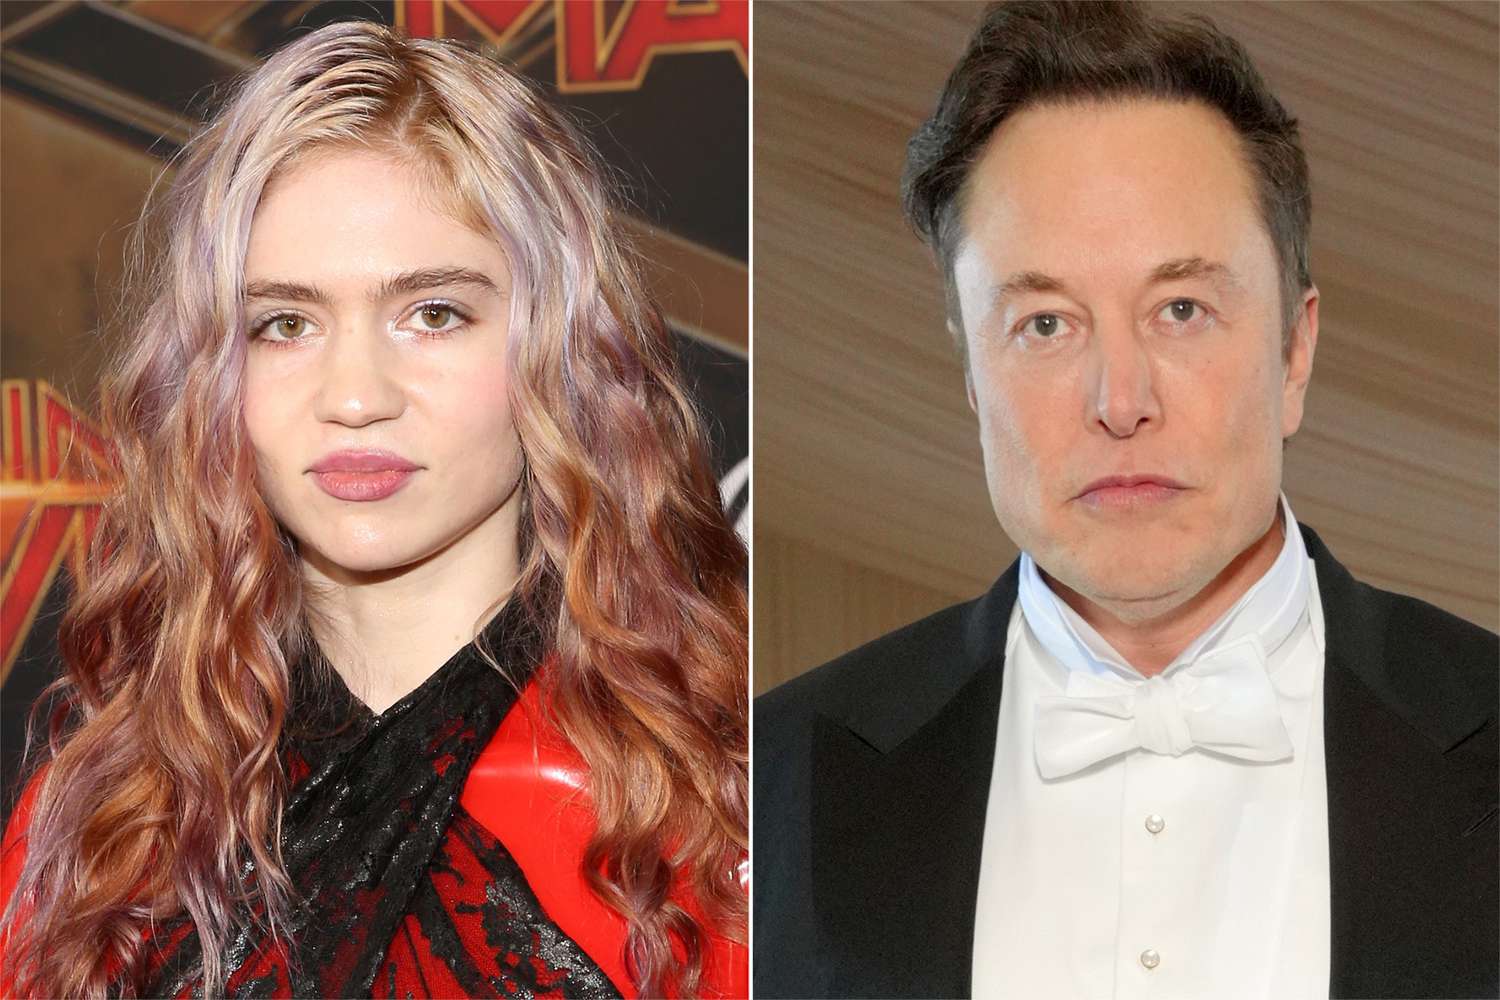 Grimes' mother accuses Elon Musk of taking couple's son to Olympics instead of seeing dying great-grandmother